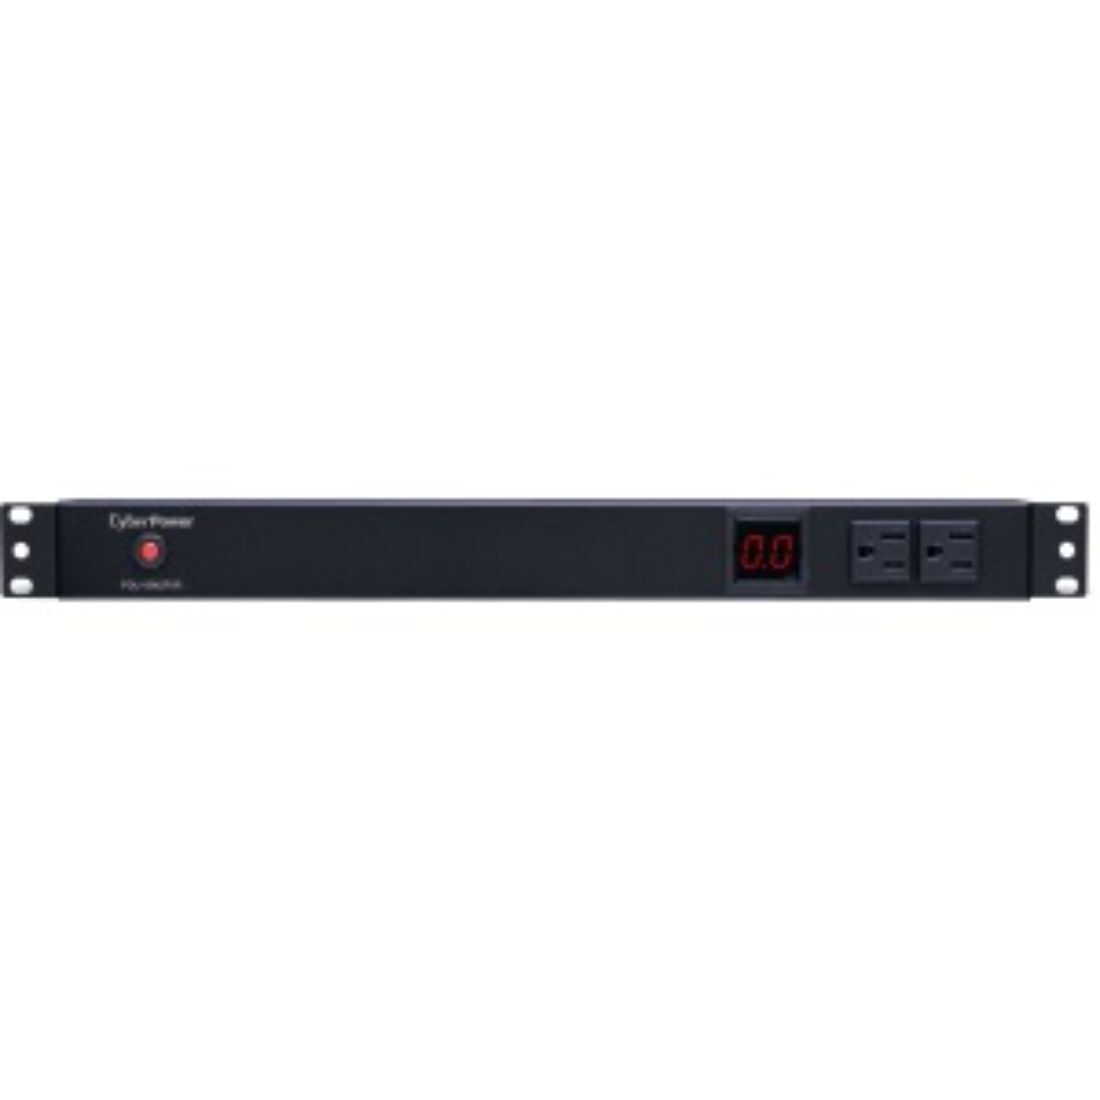 CyberPower Metered PDU15M2F8R 10-Outlets PDU - 1U Rack-mountable